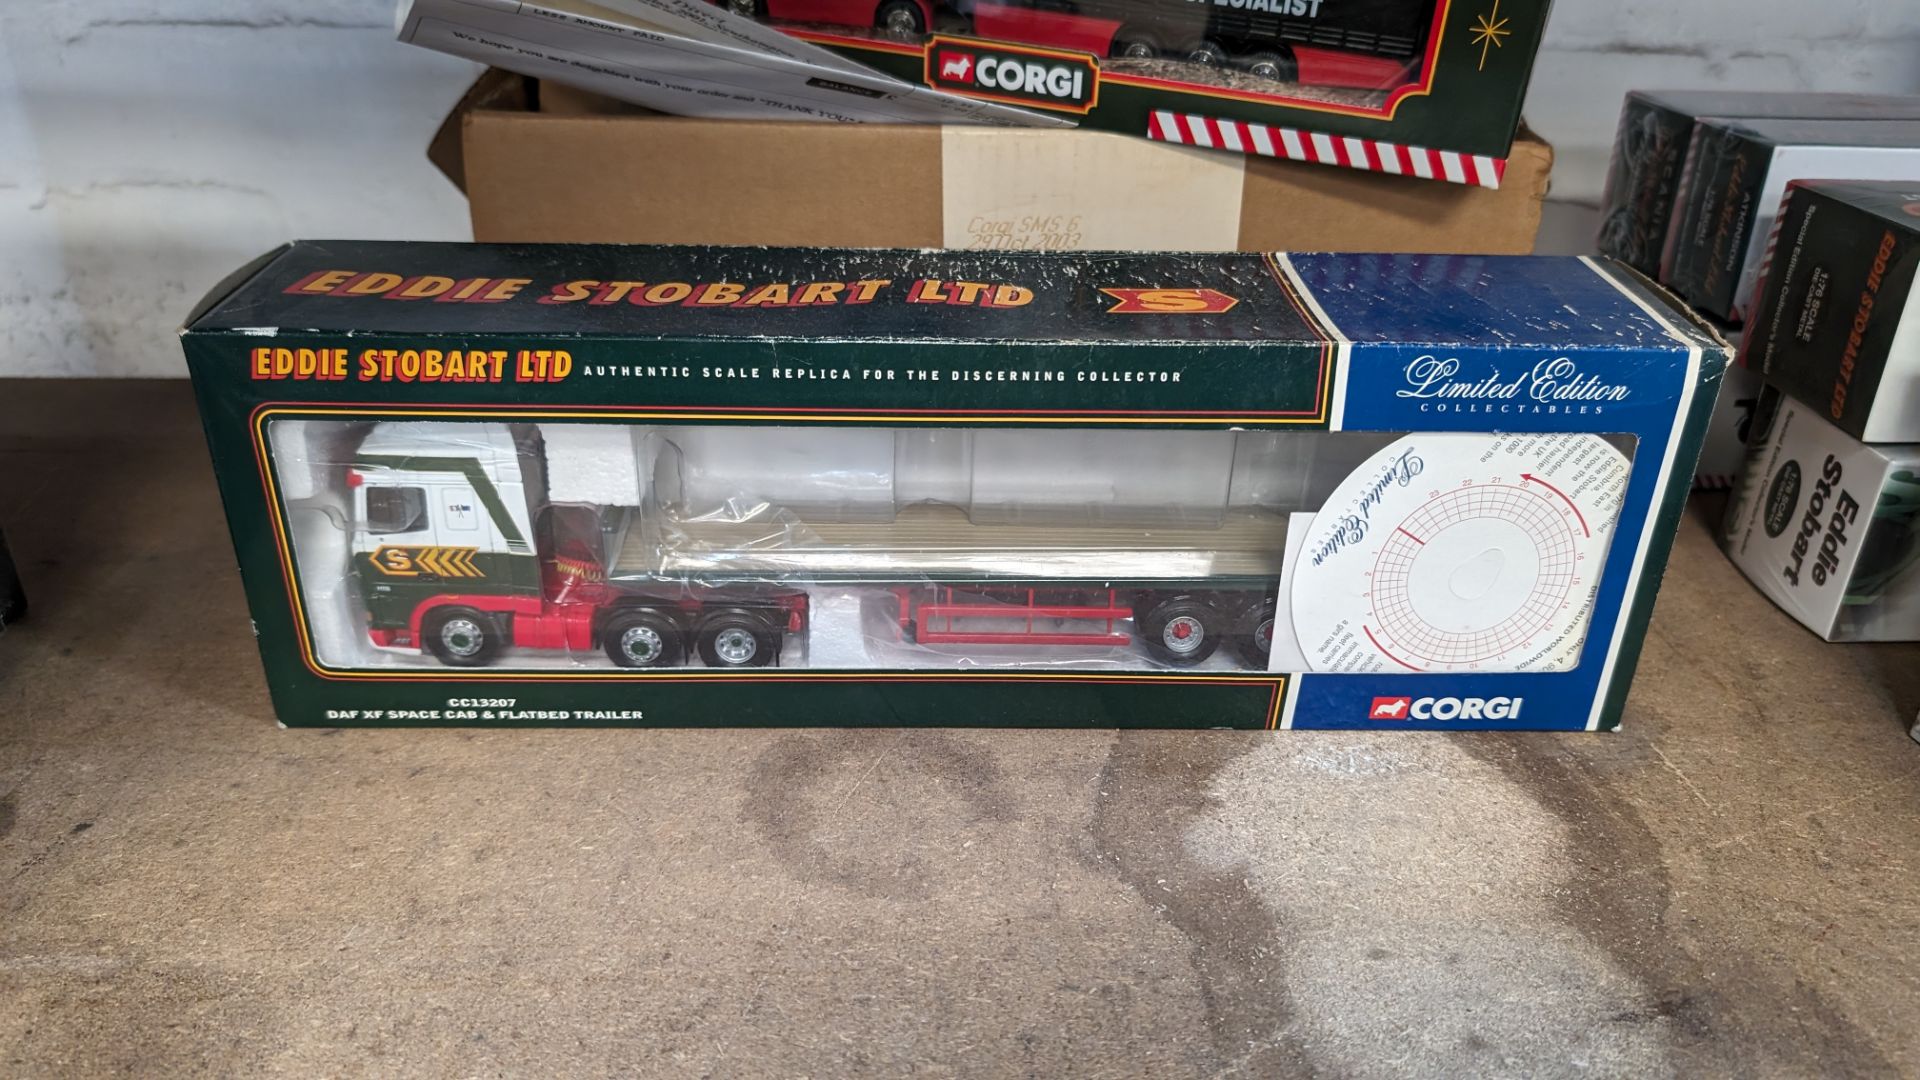 4 off assorted Eddie Stobart model trucks including limited edition - Image 5 of 12